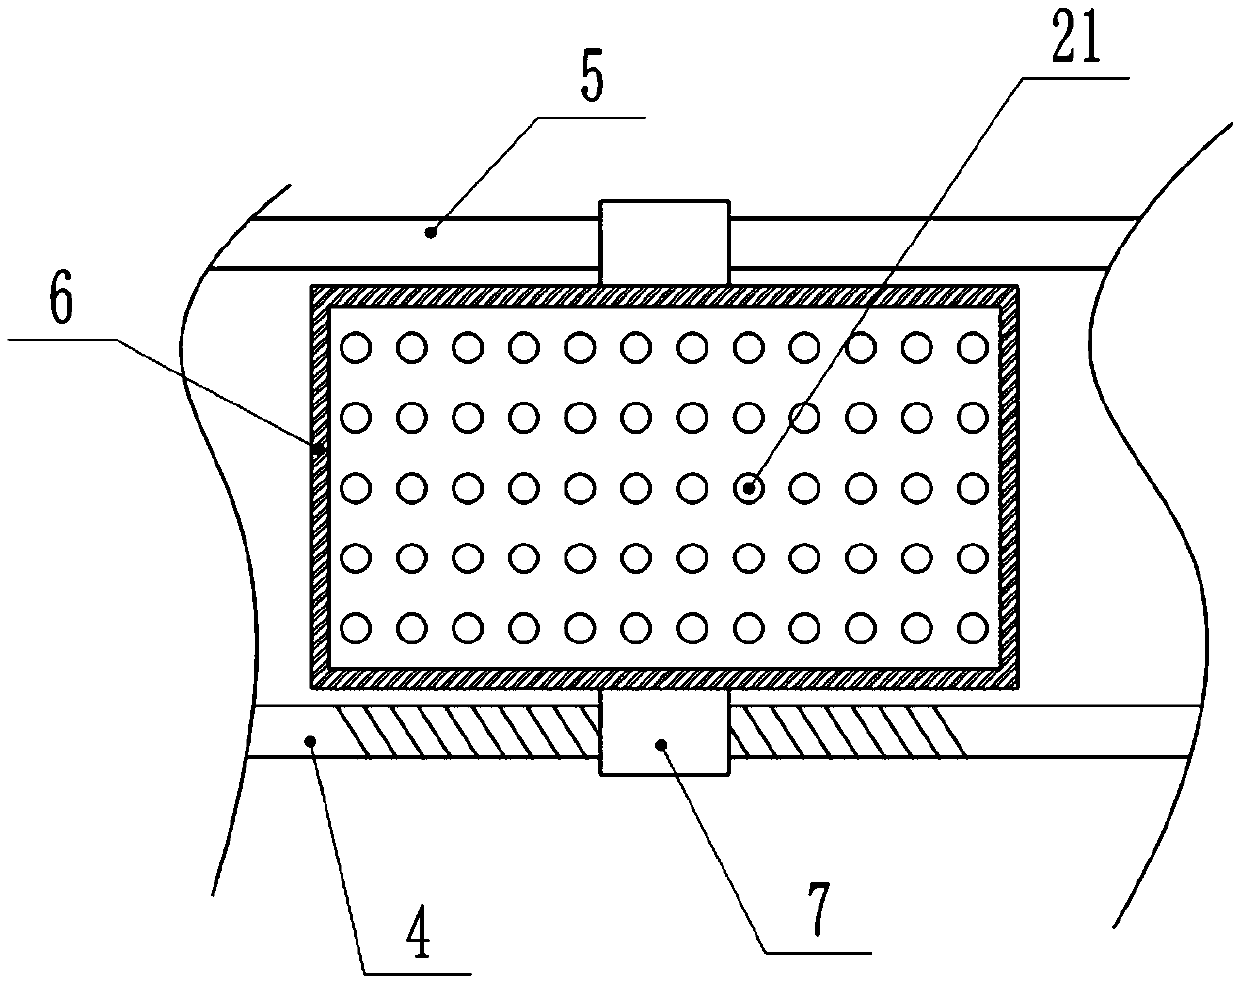 A high-efficiency grinding device for tablets used in the preparation of capsule western medicines